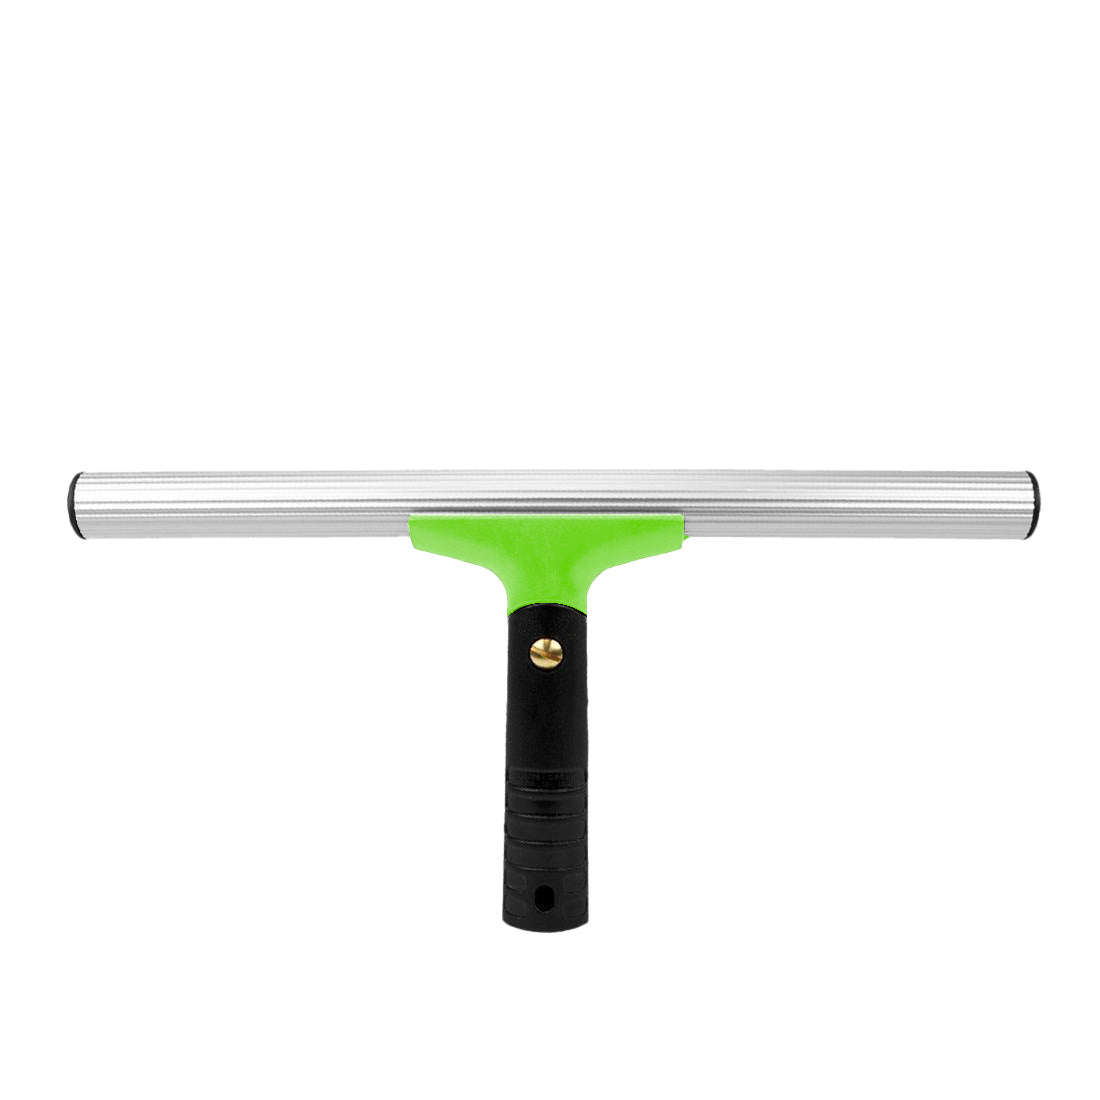 Window Squeegees & Scrubbers  High Access Cleaning Tools & Products